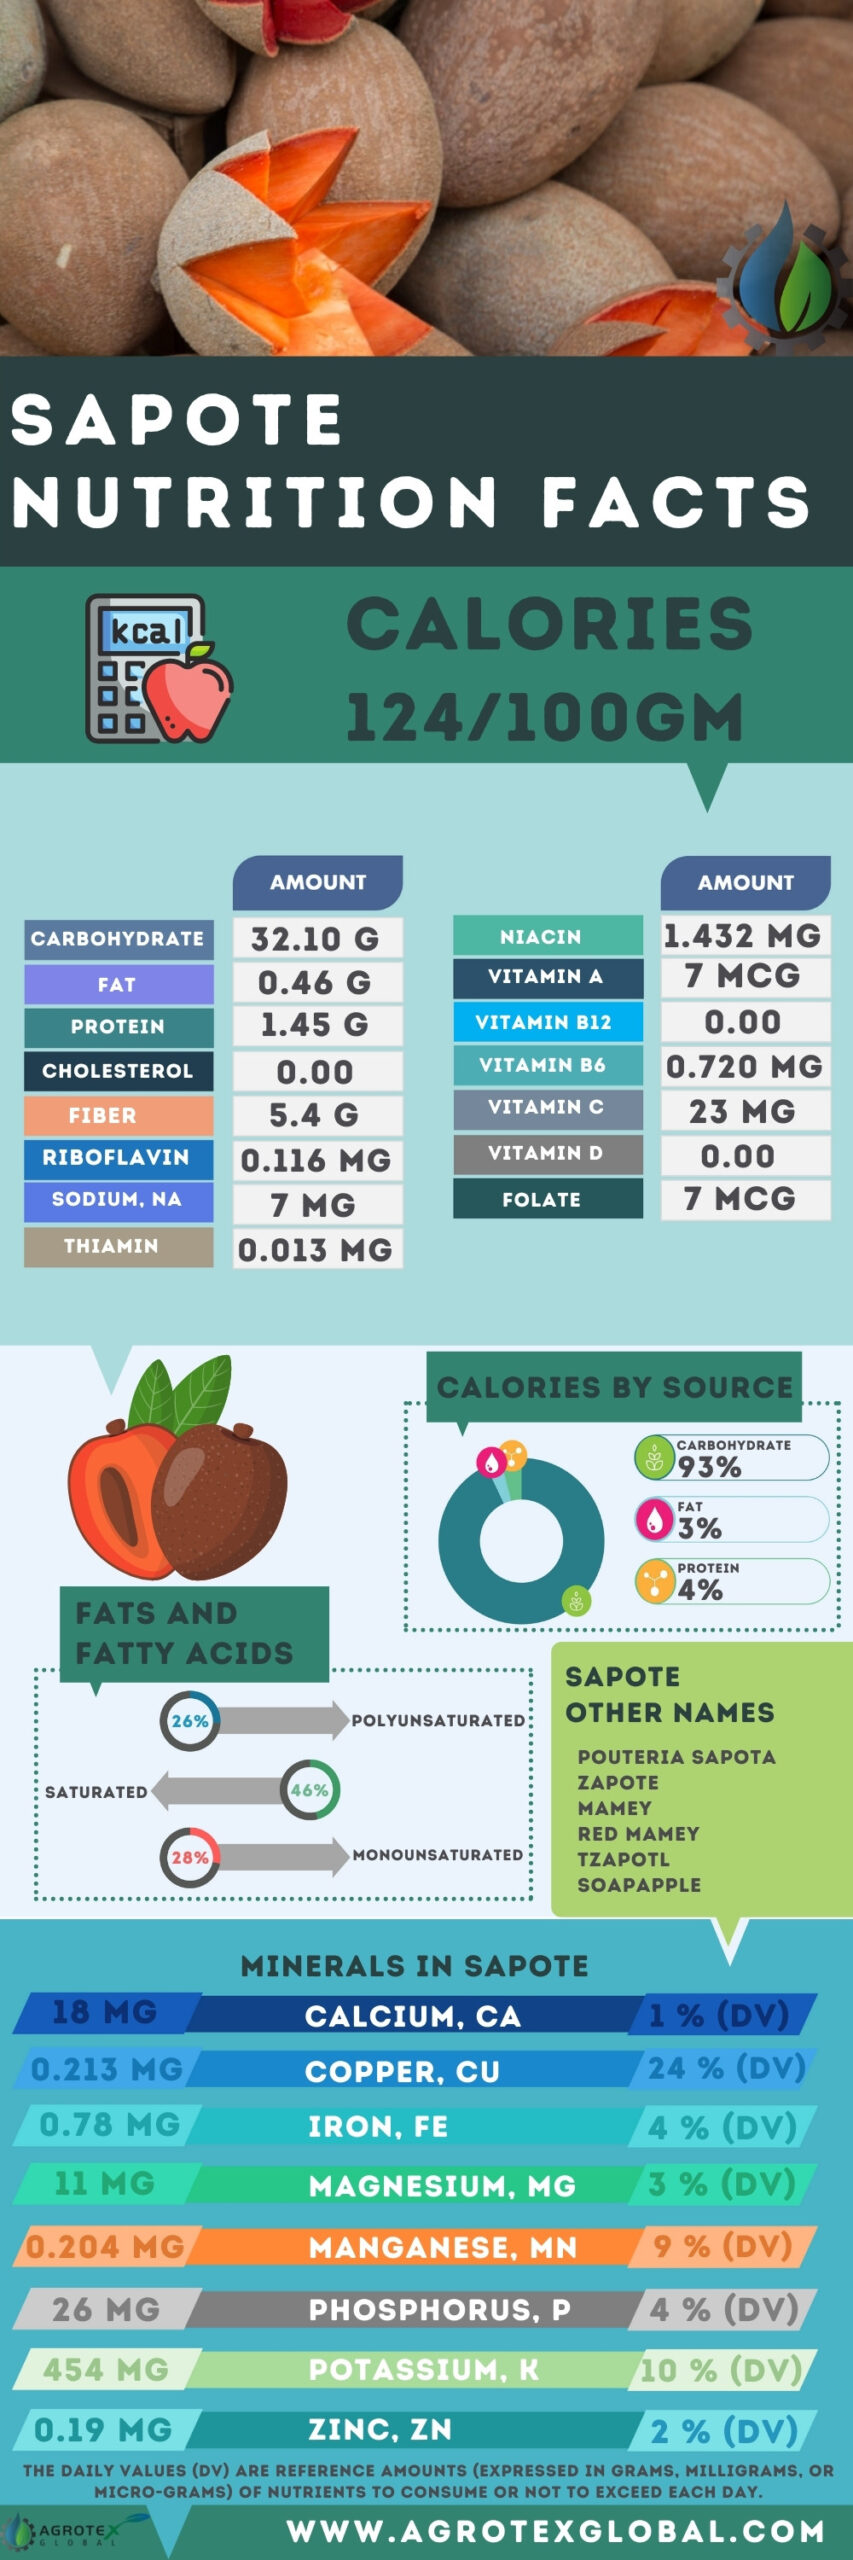 Sapote mamey NUTRITION FACTS calorie chart infographic